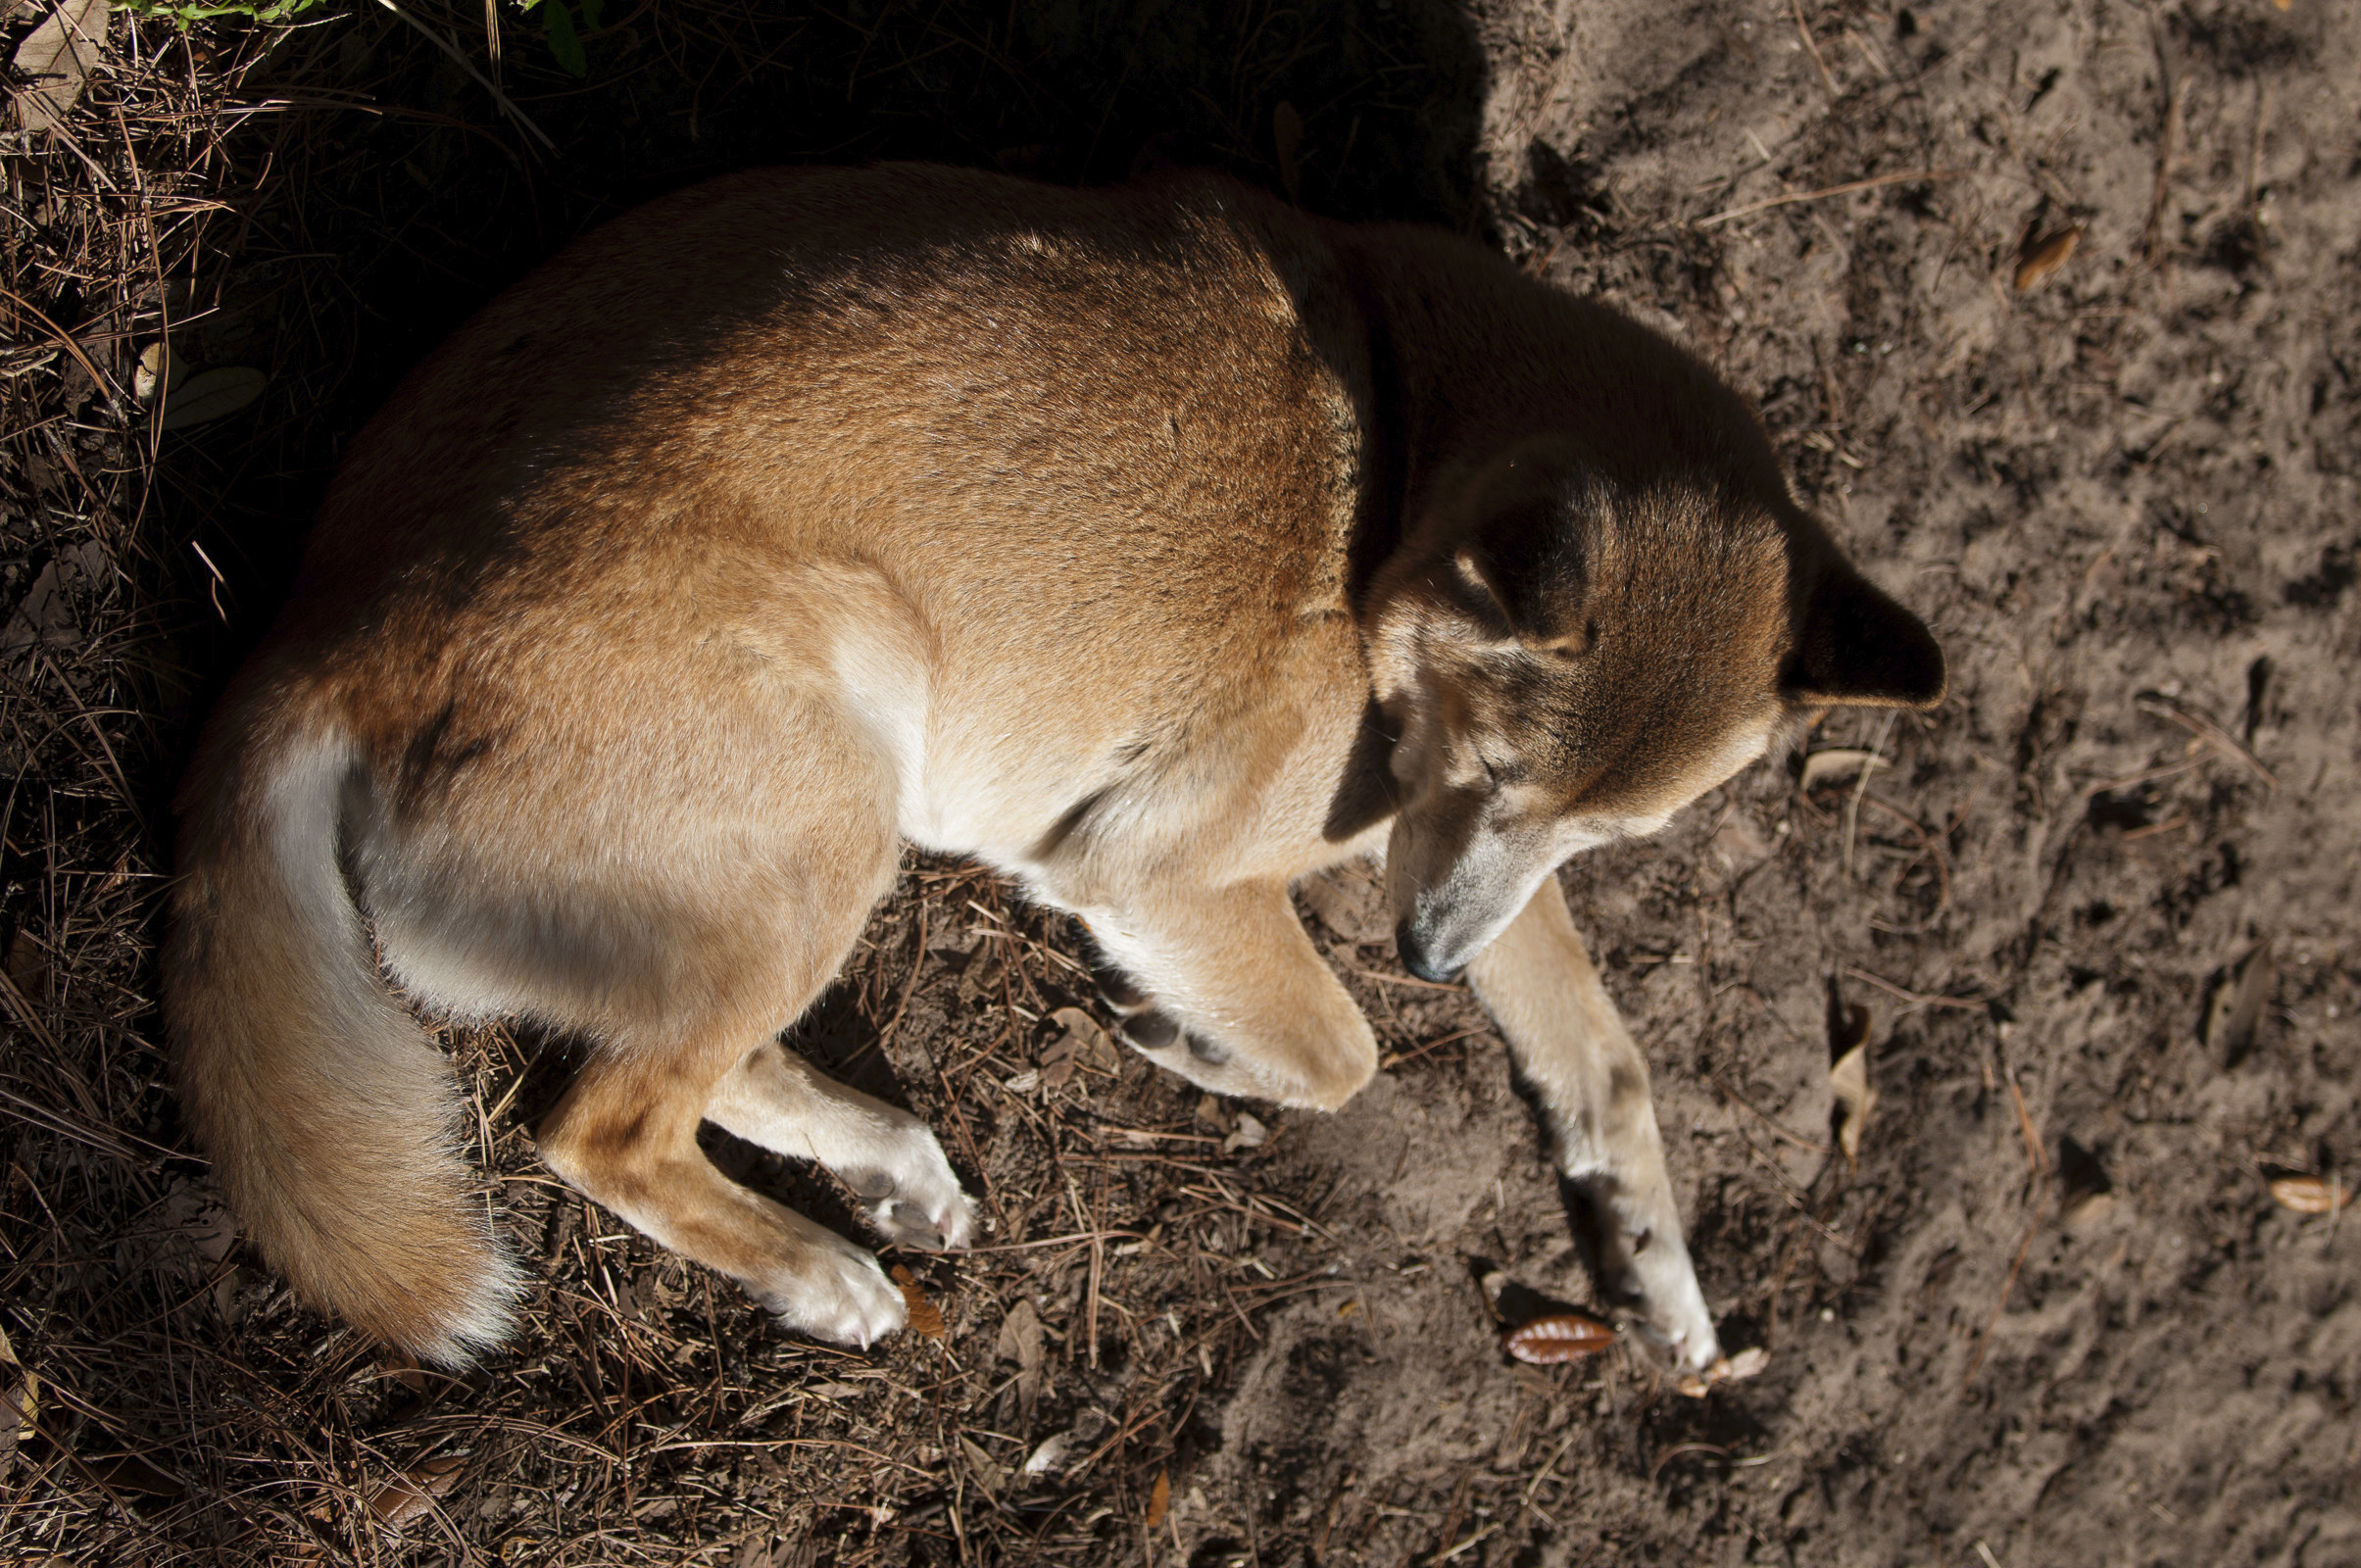 The New Guinea Singing Dog lying down